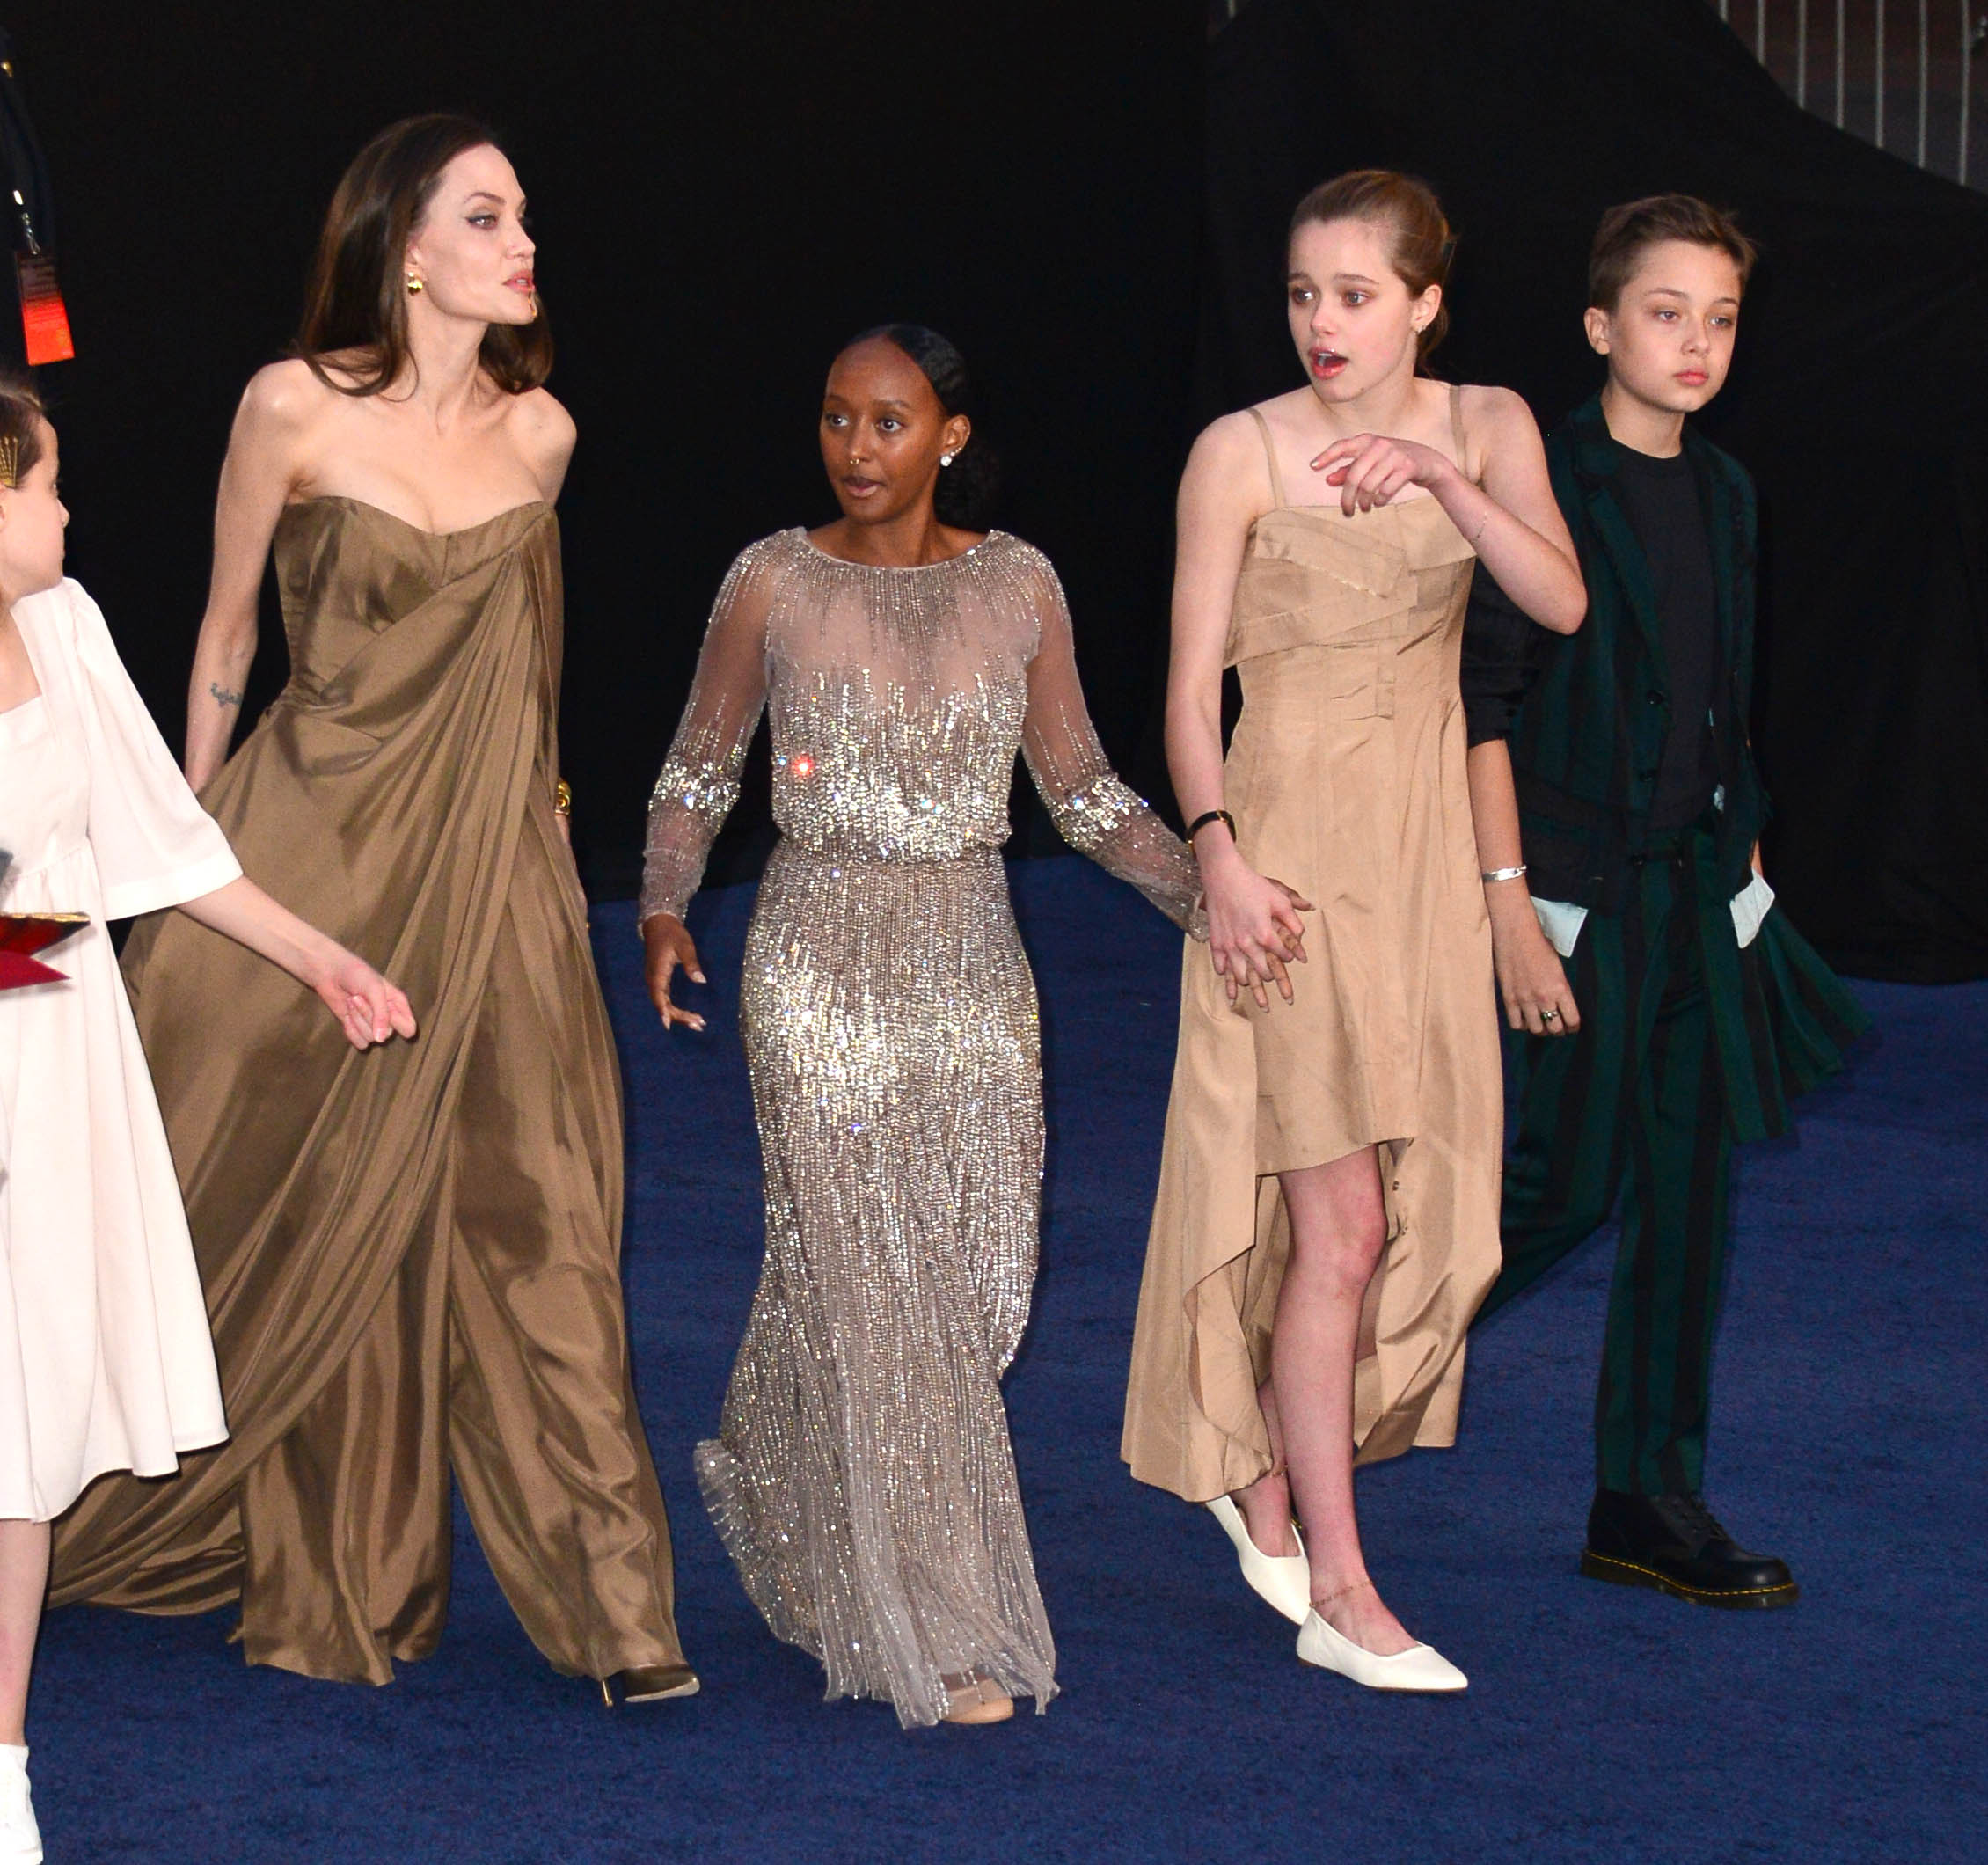 Angelina Jolie and her children Zahara, Shiloh, and Knox in Los Angeles in 2021. | Source: Getty Images